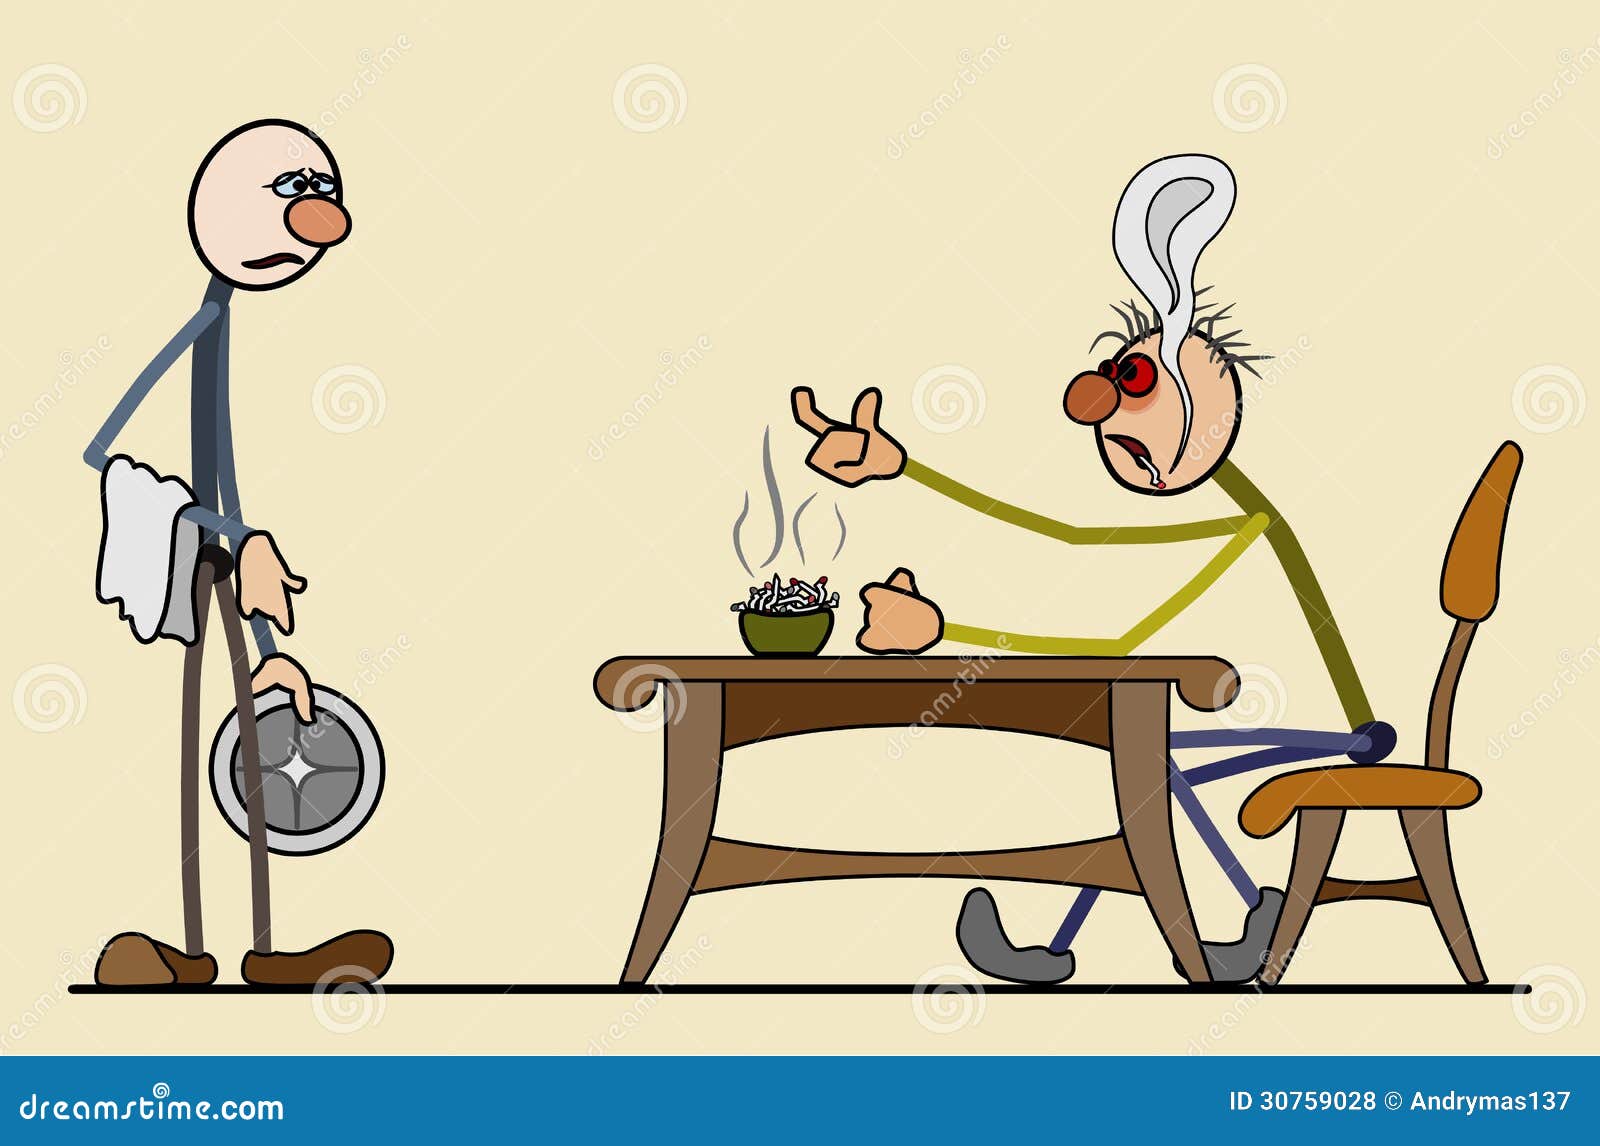 Angry Customer Restaurant Stock Illustrations – 25 Angry Customer  Restaurant Stock Illustrations, Vectors & Clipart - Dreamstime